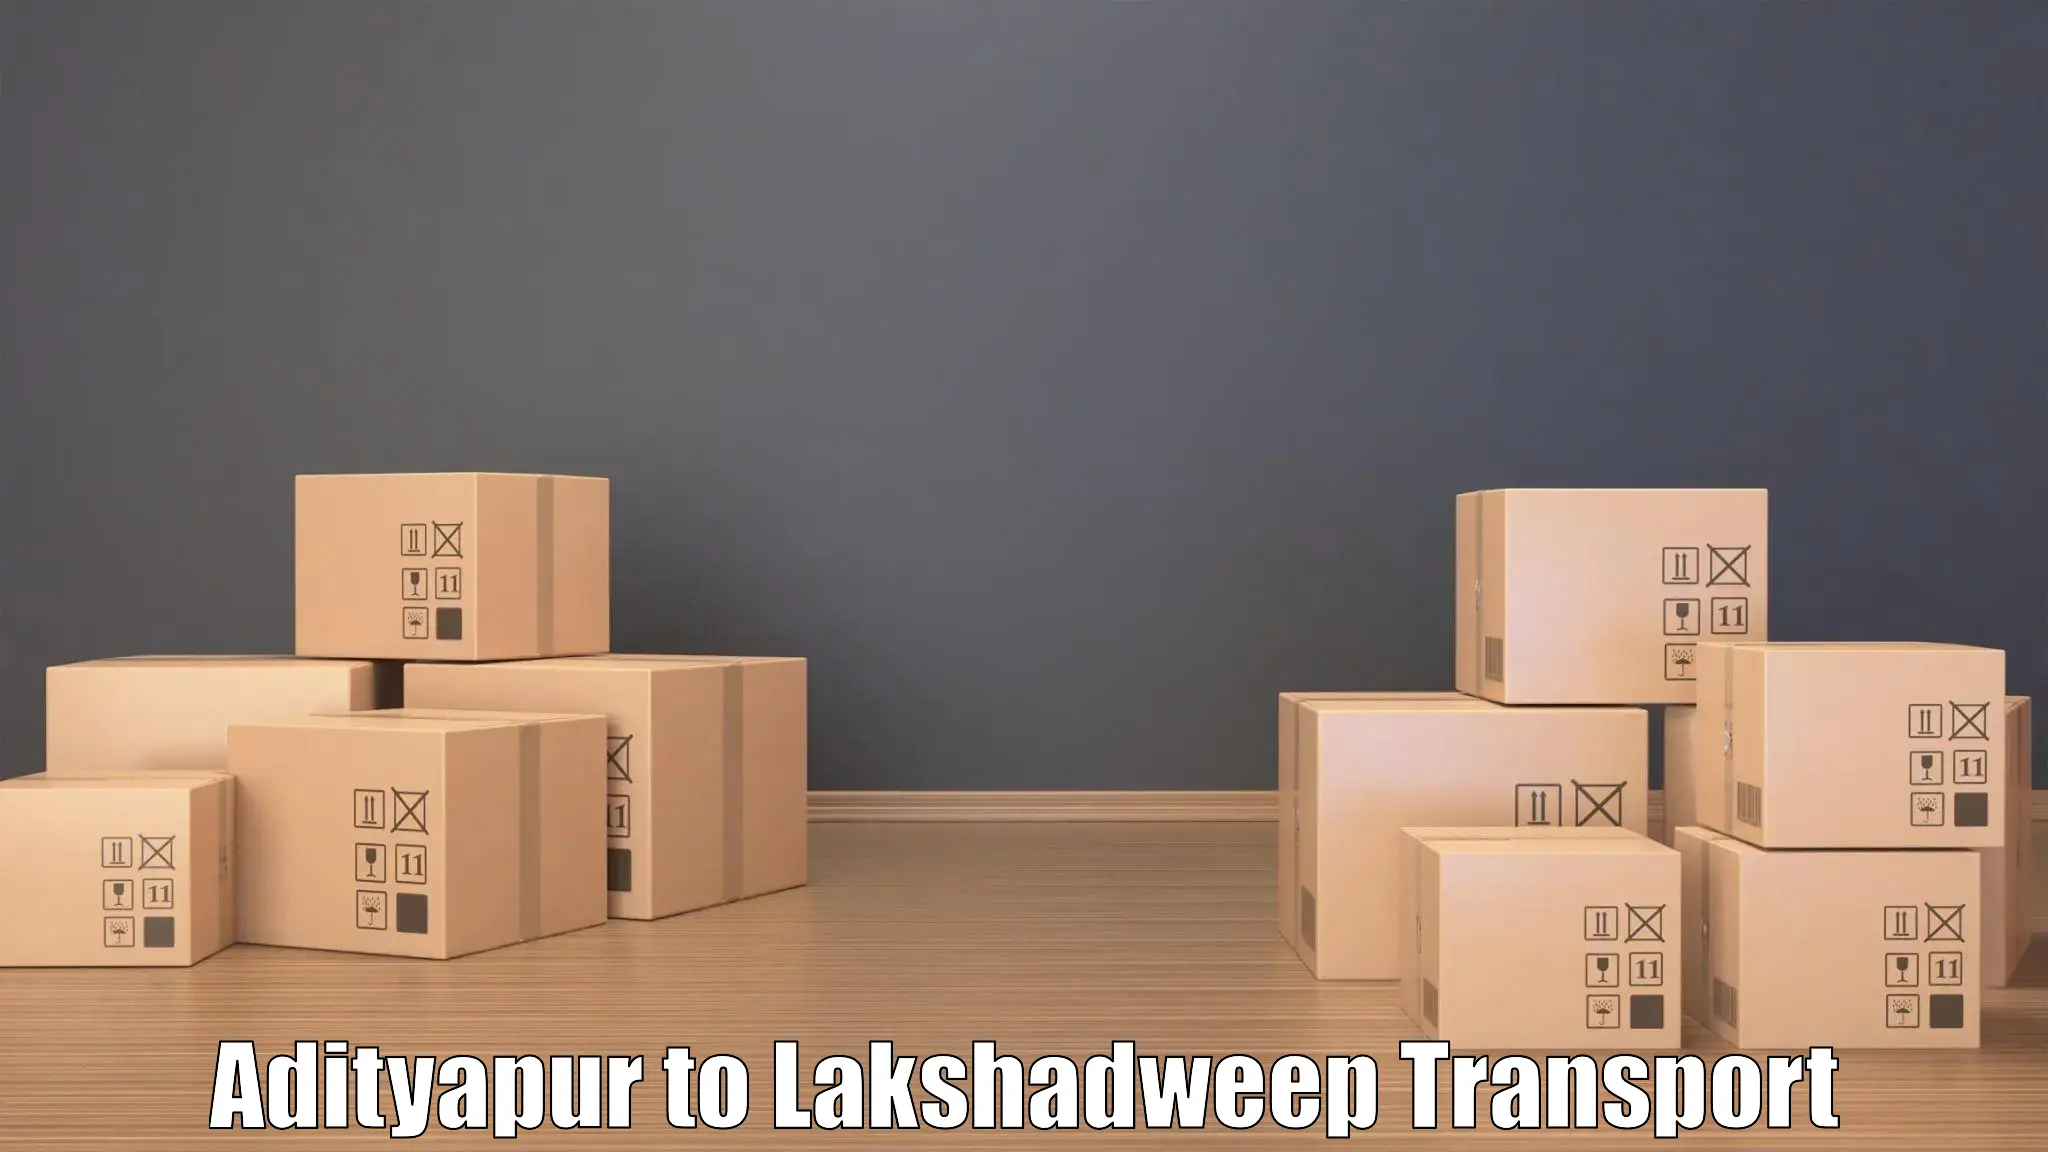 Transport bike from one state to another in Adityapur to Lakshadweep